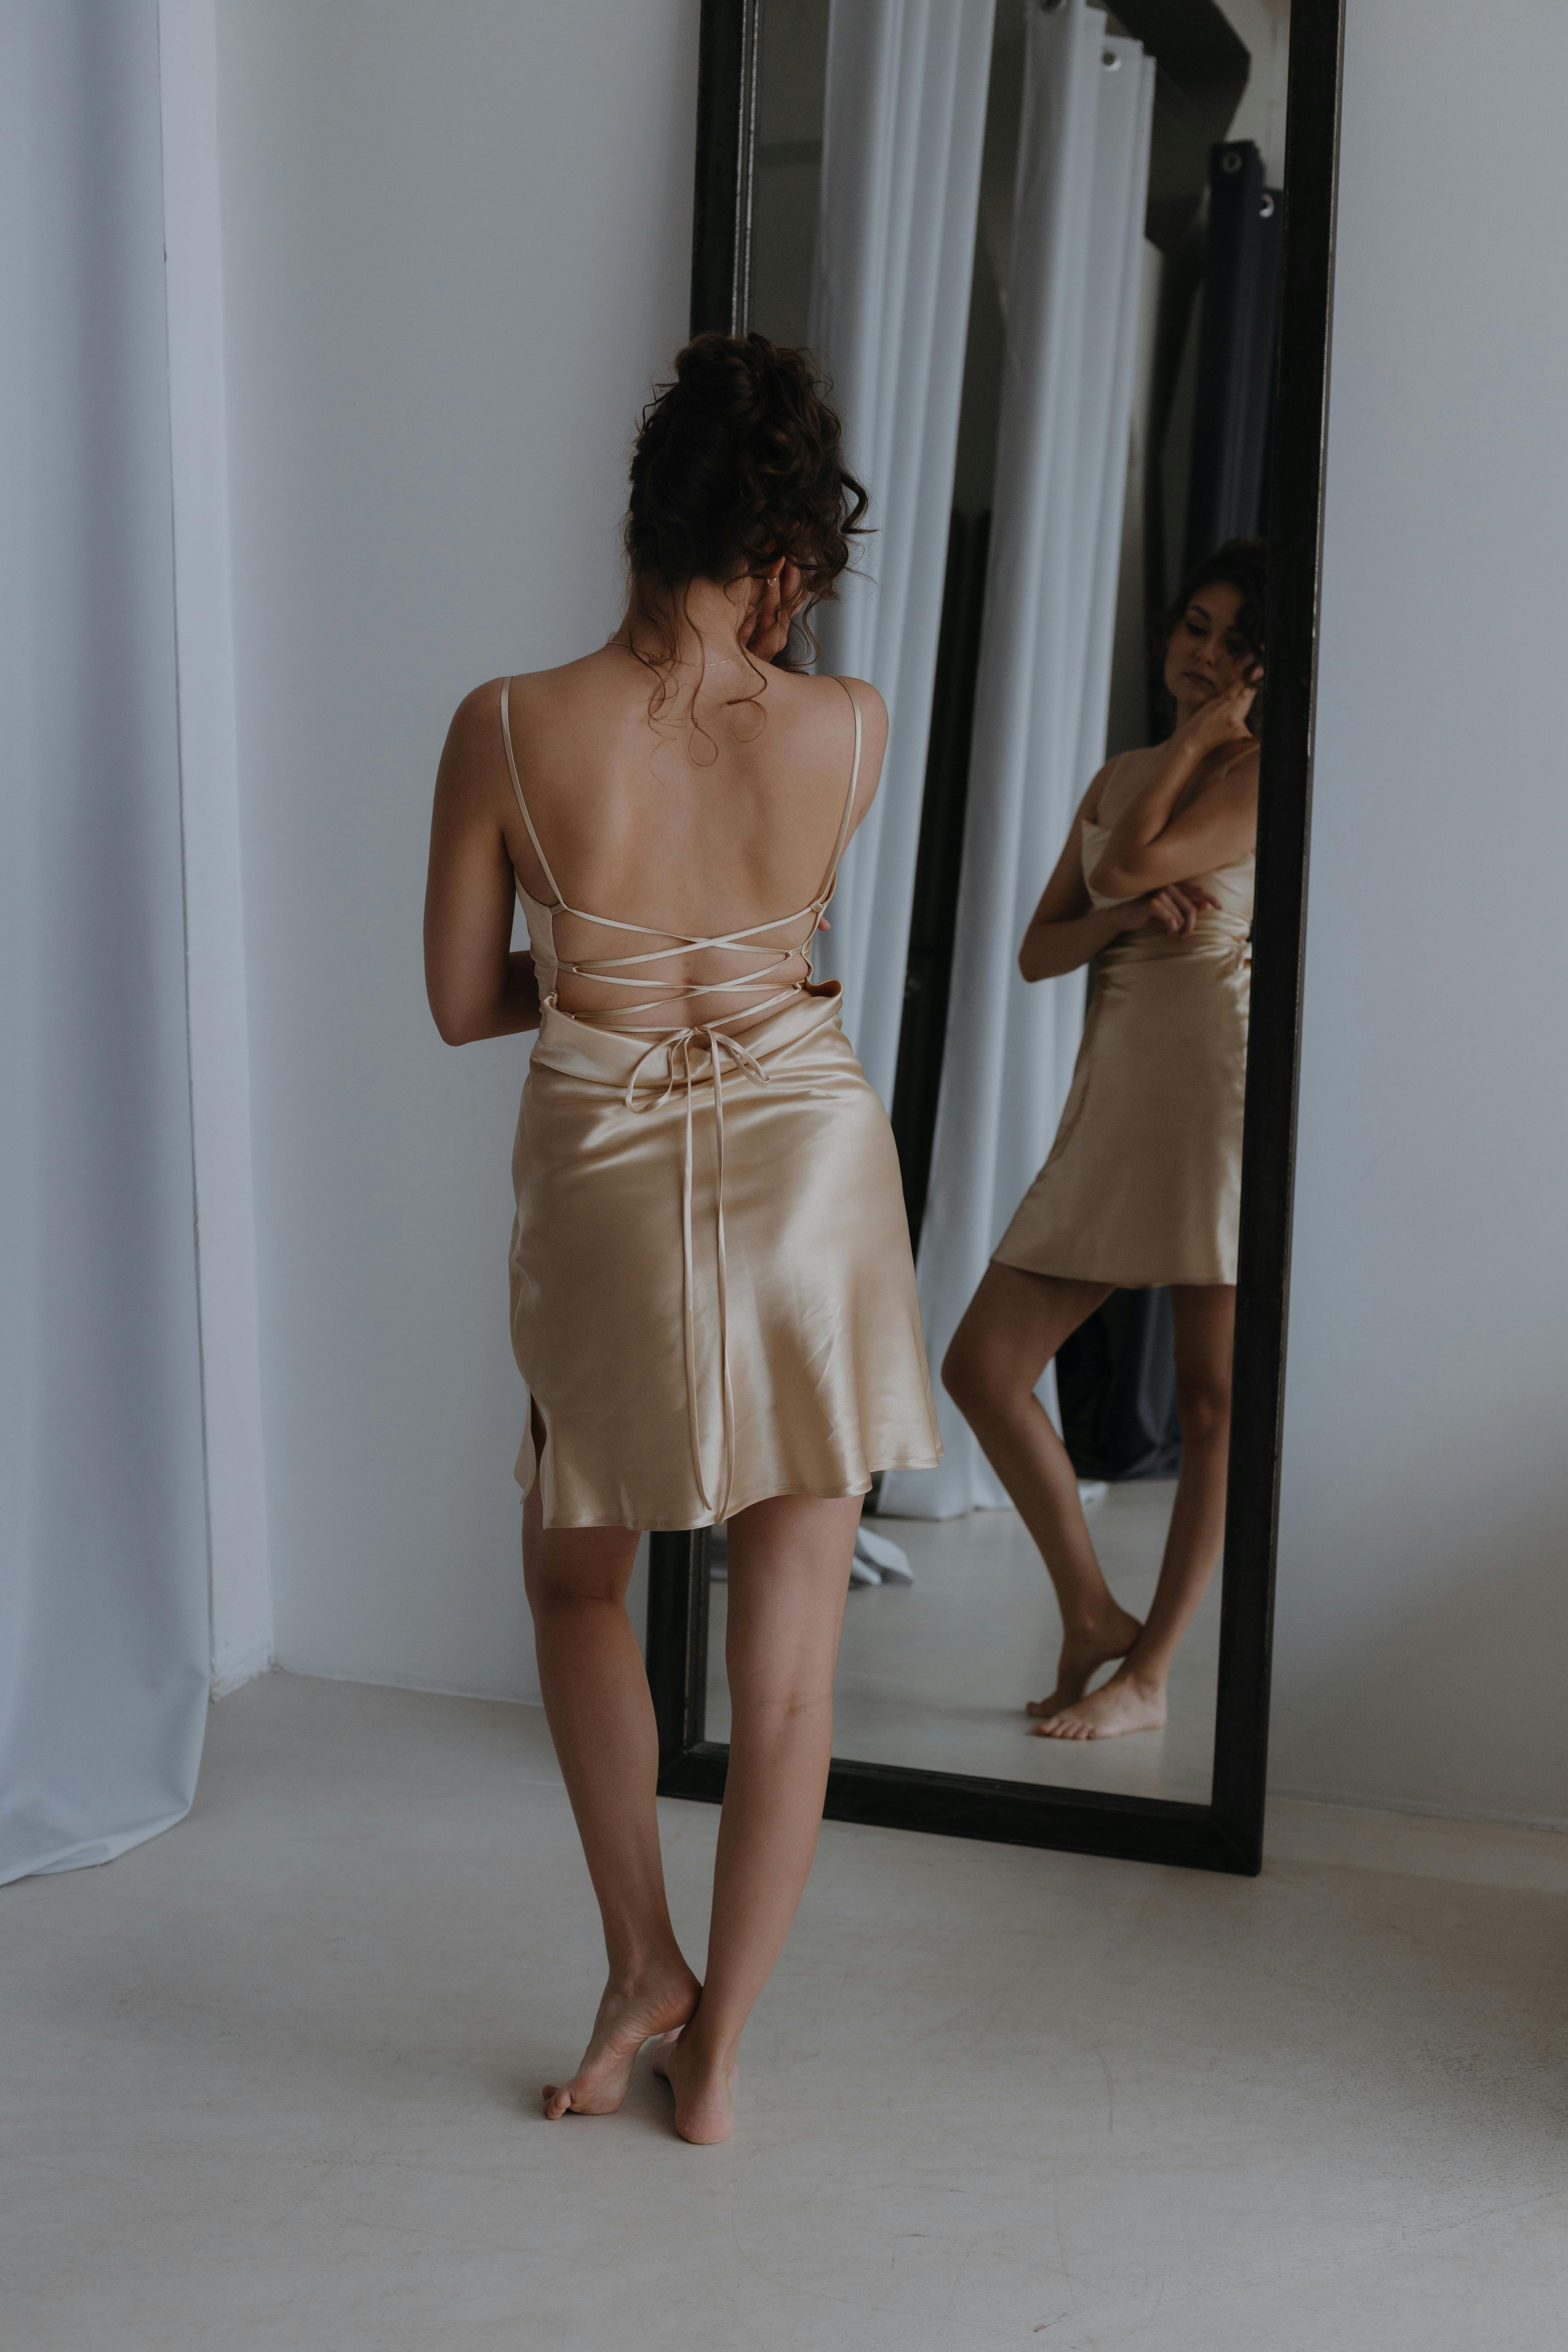 Brunette Woman in Champagne Color Backless Slip Dress Posing in front of  Mirror · Free Stock Photo